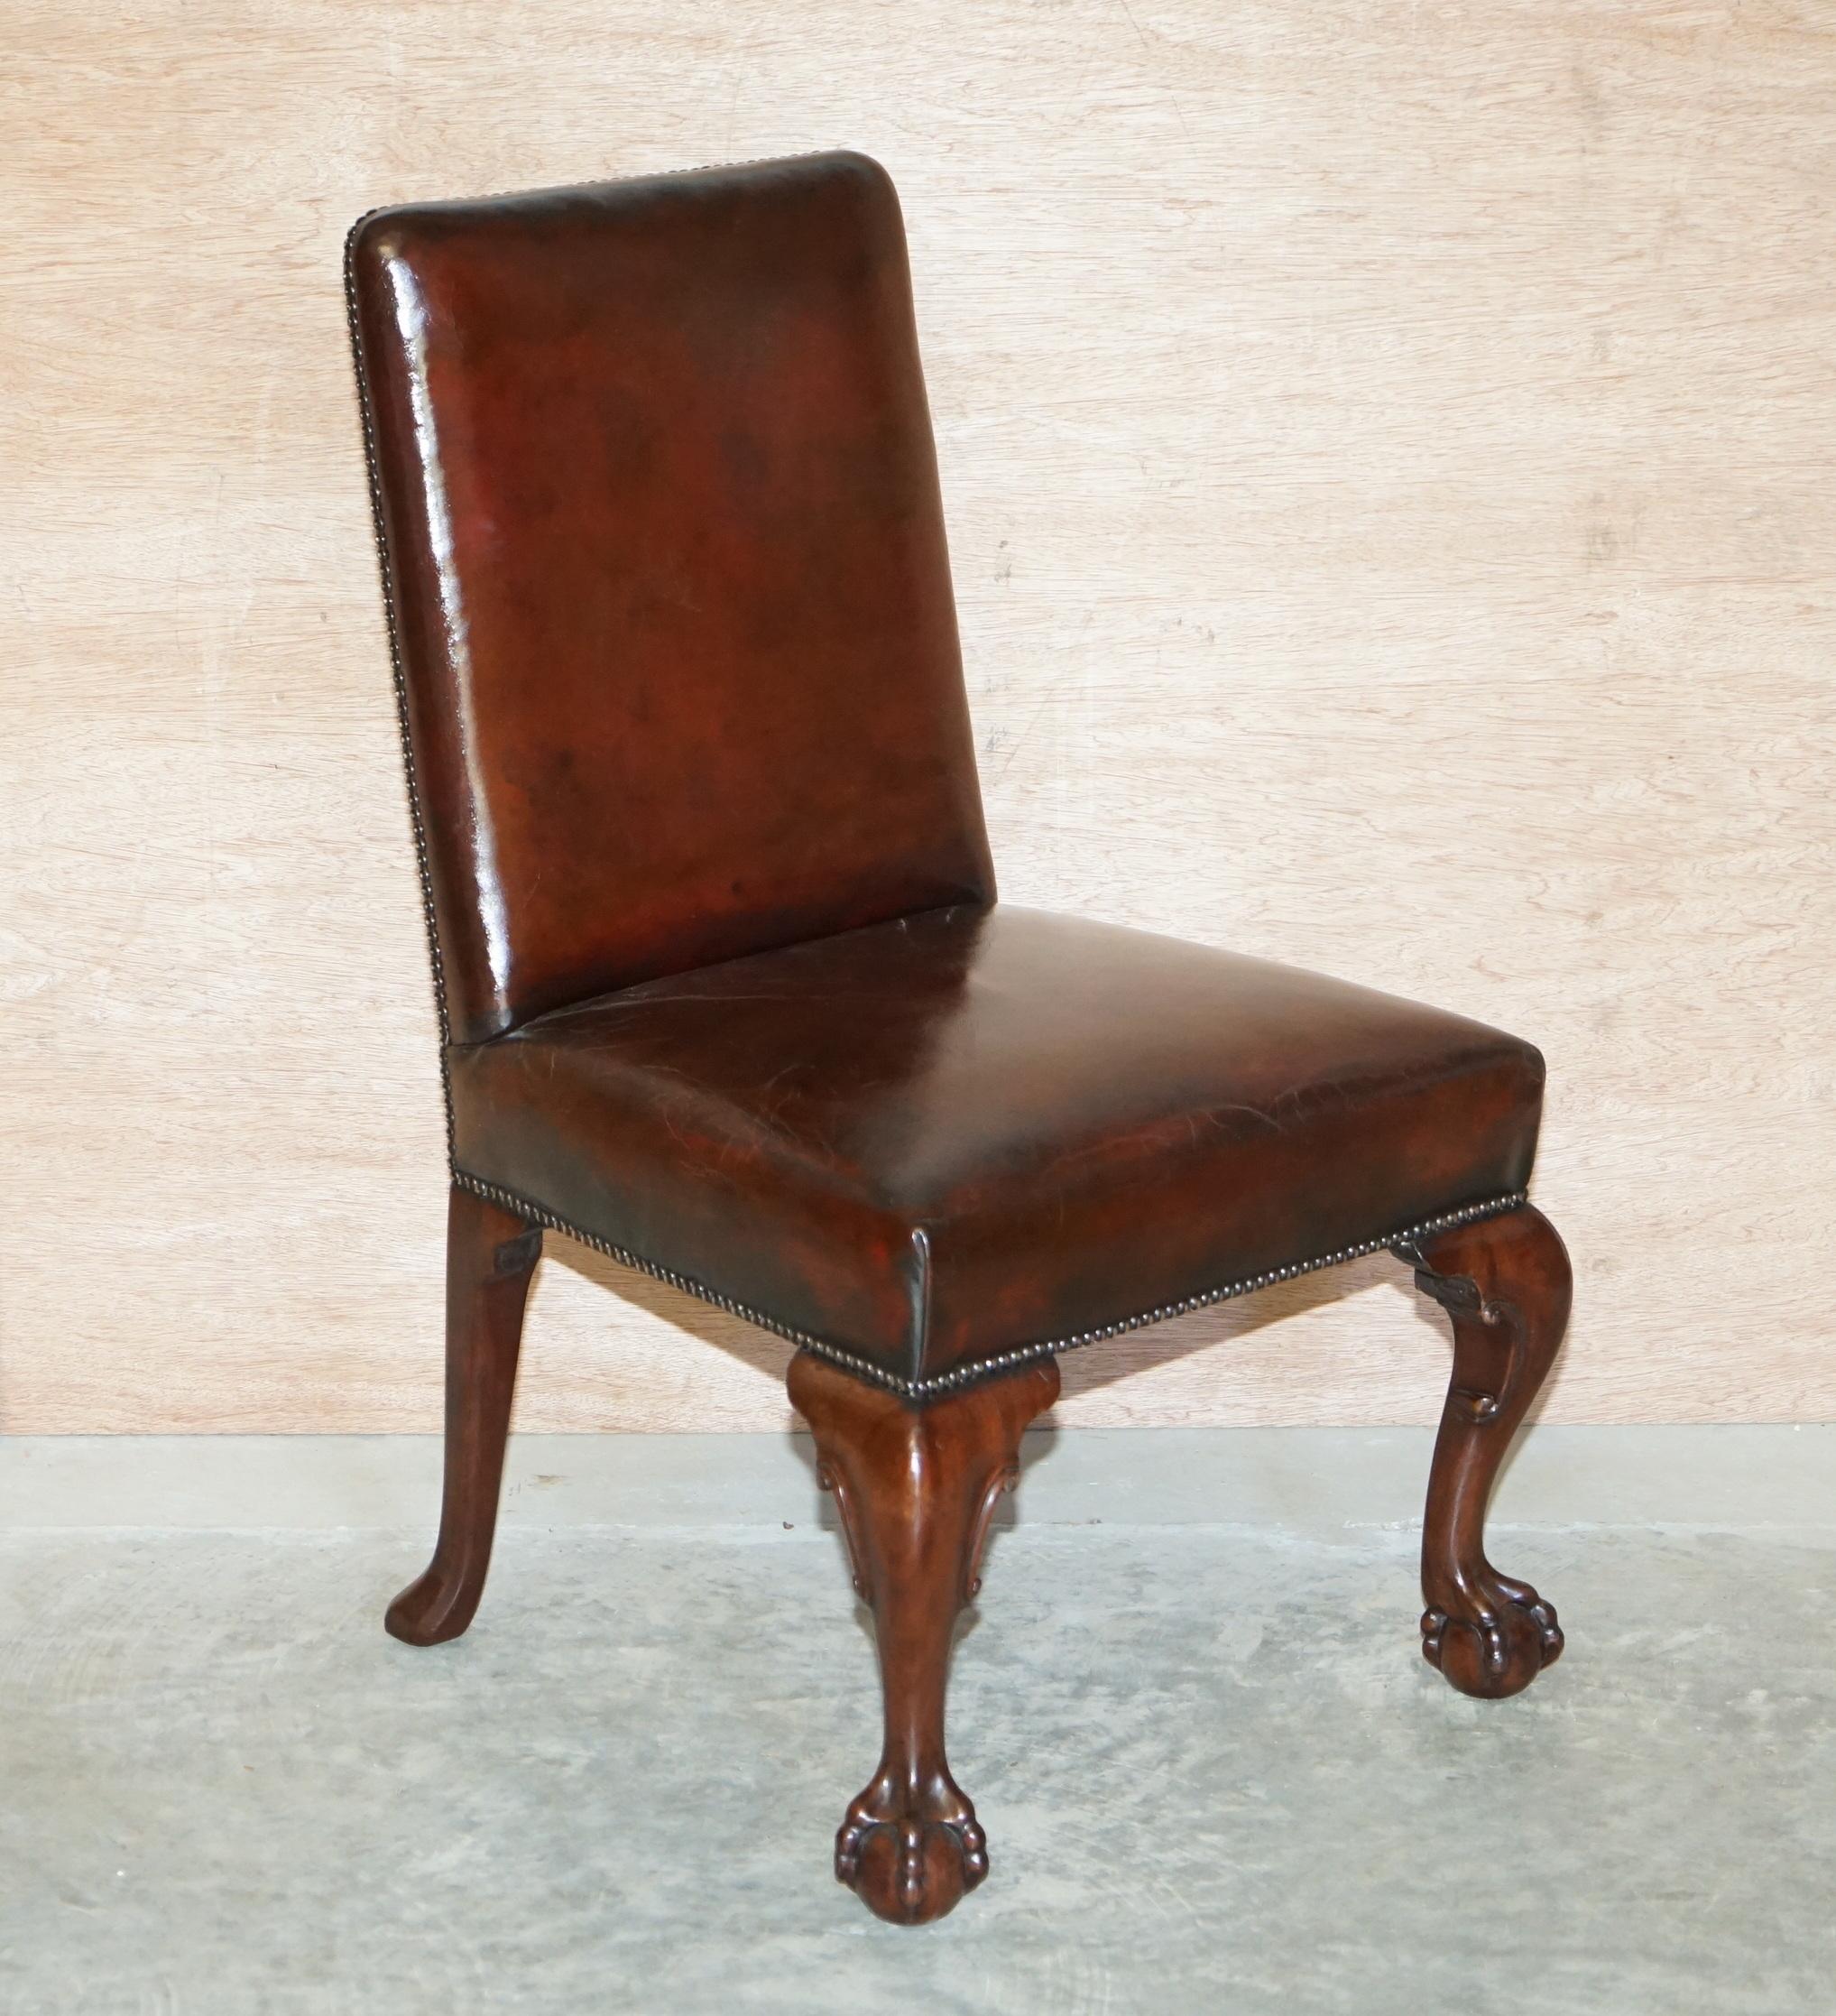 We are delighted to this stunning suite of six fully restored early Victorian circa 1840 mahogany framed brown leather dining chairs

These are a very fine, highly decorative and extremely comfortable suite of chairs, the seat bases are